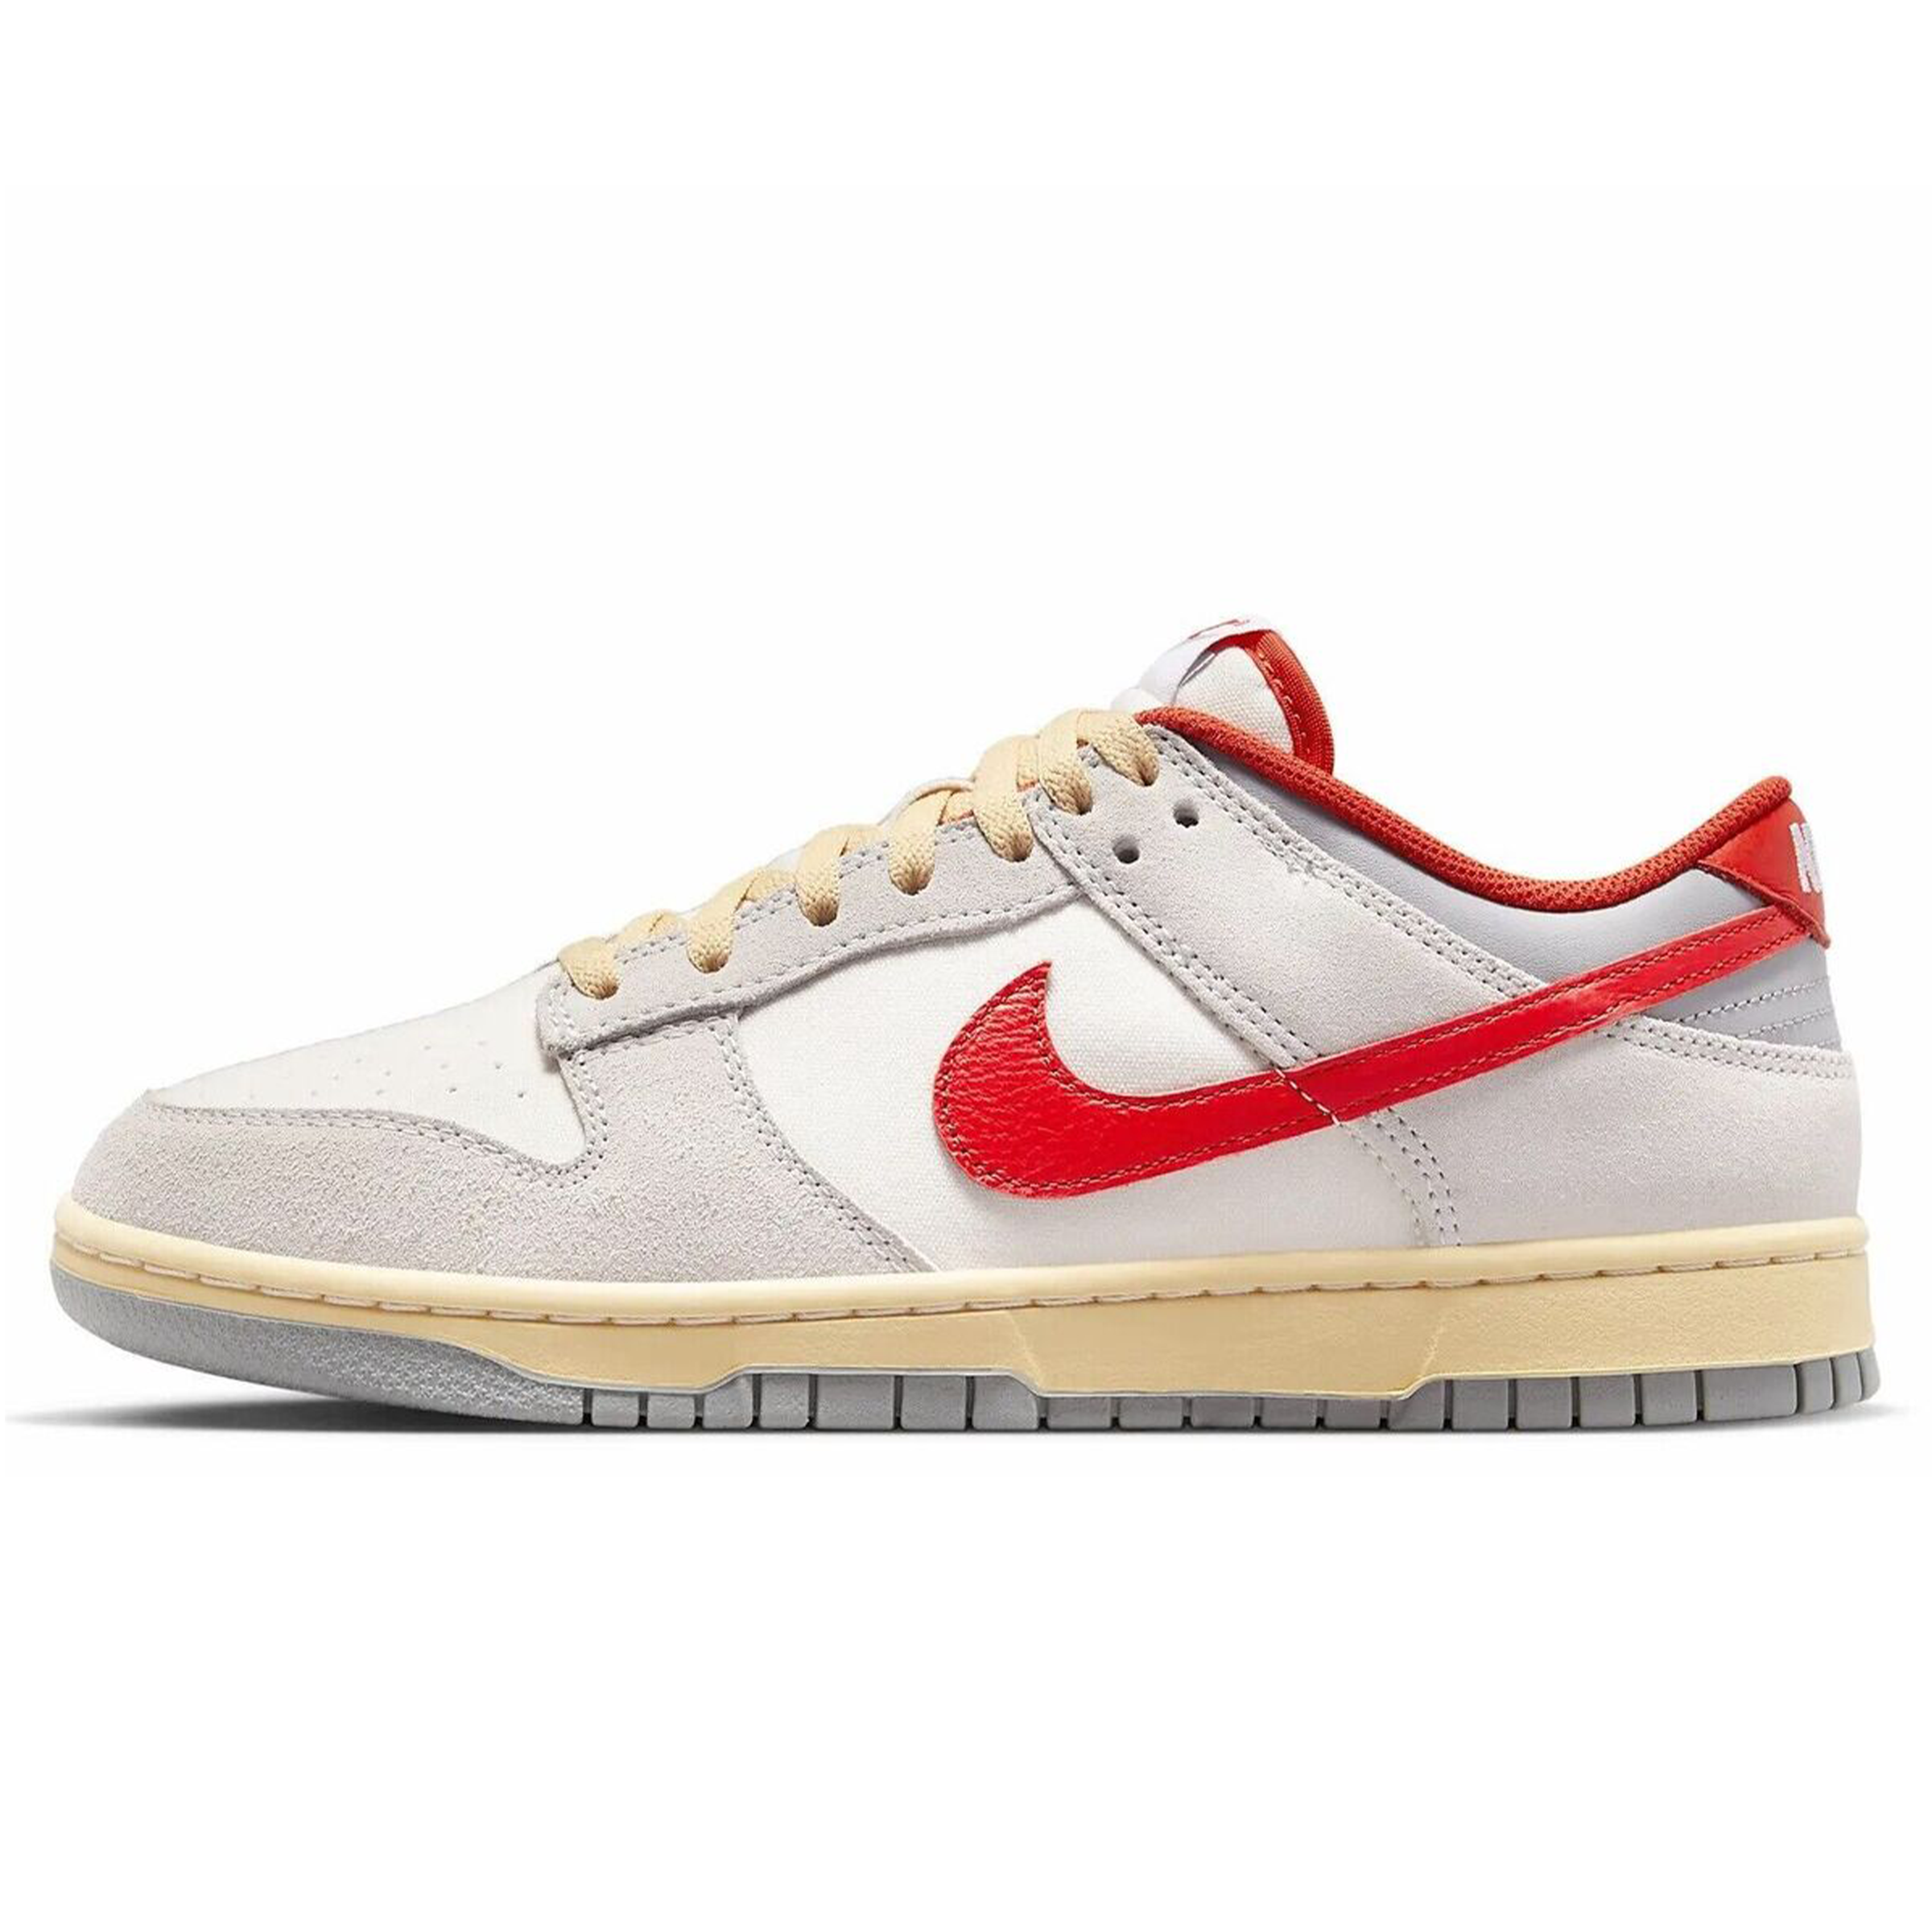 Nike Dunk Low - "Athletic Department Picante Red"